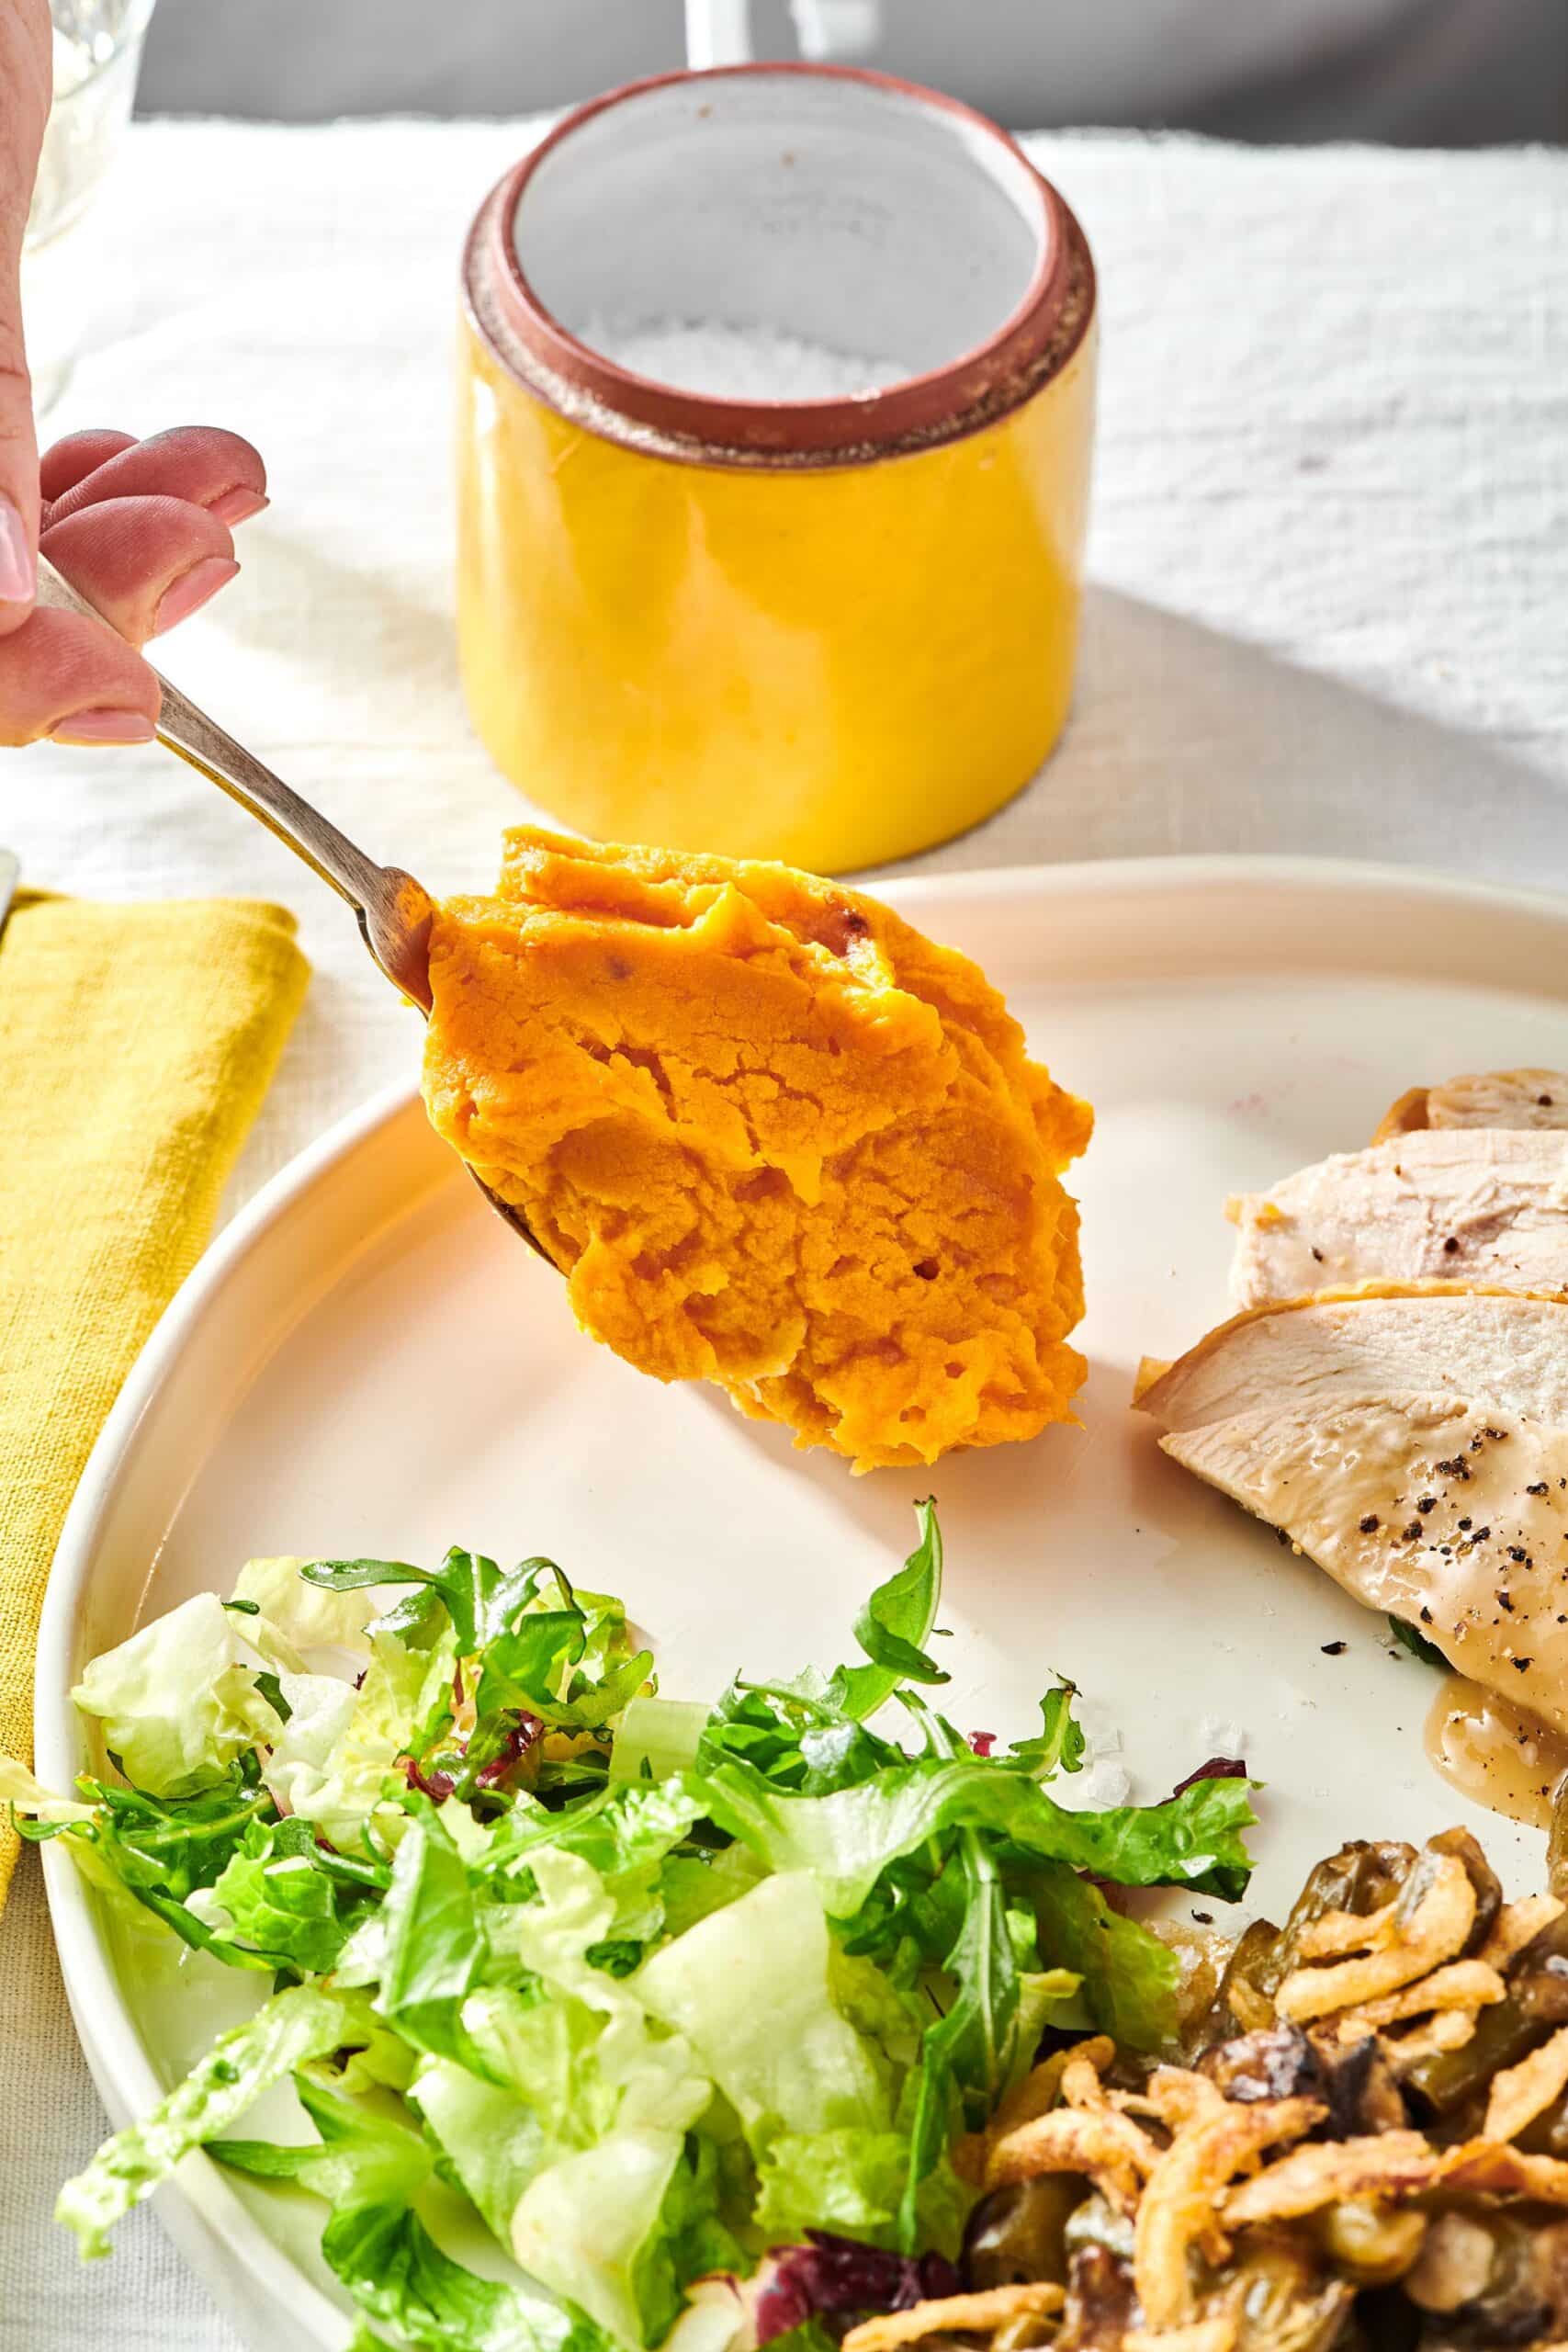 Spoon scooping Garlic Mashed Sweet Potatoes onto a plate with meat and salad.